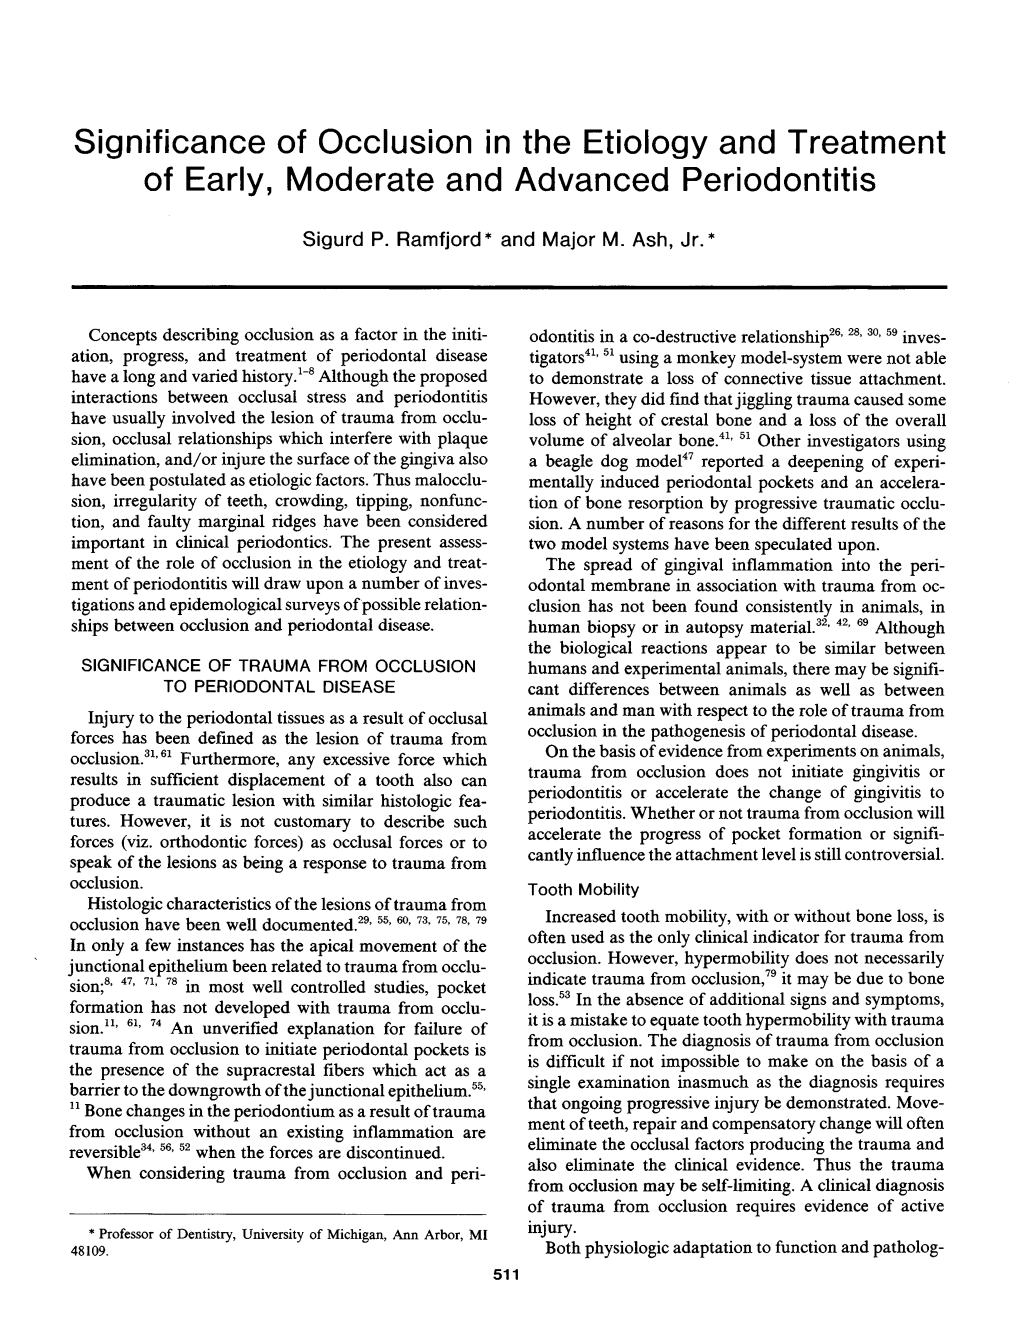 Significance of Occlusion in the Etiology and Treatment of Early, Moderate and Advanced Periodontitis